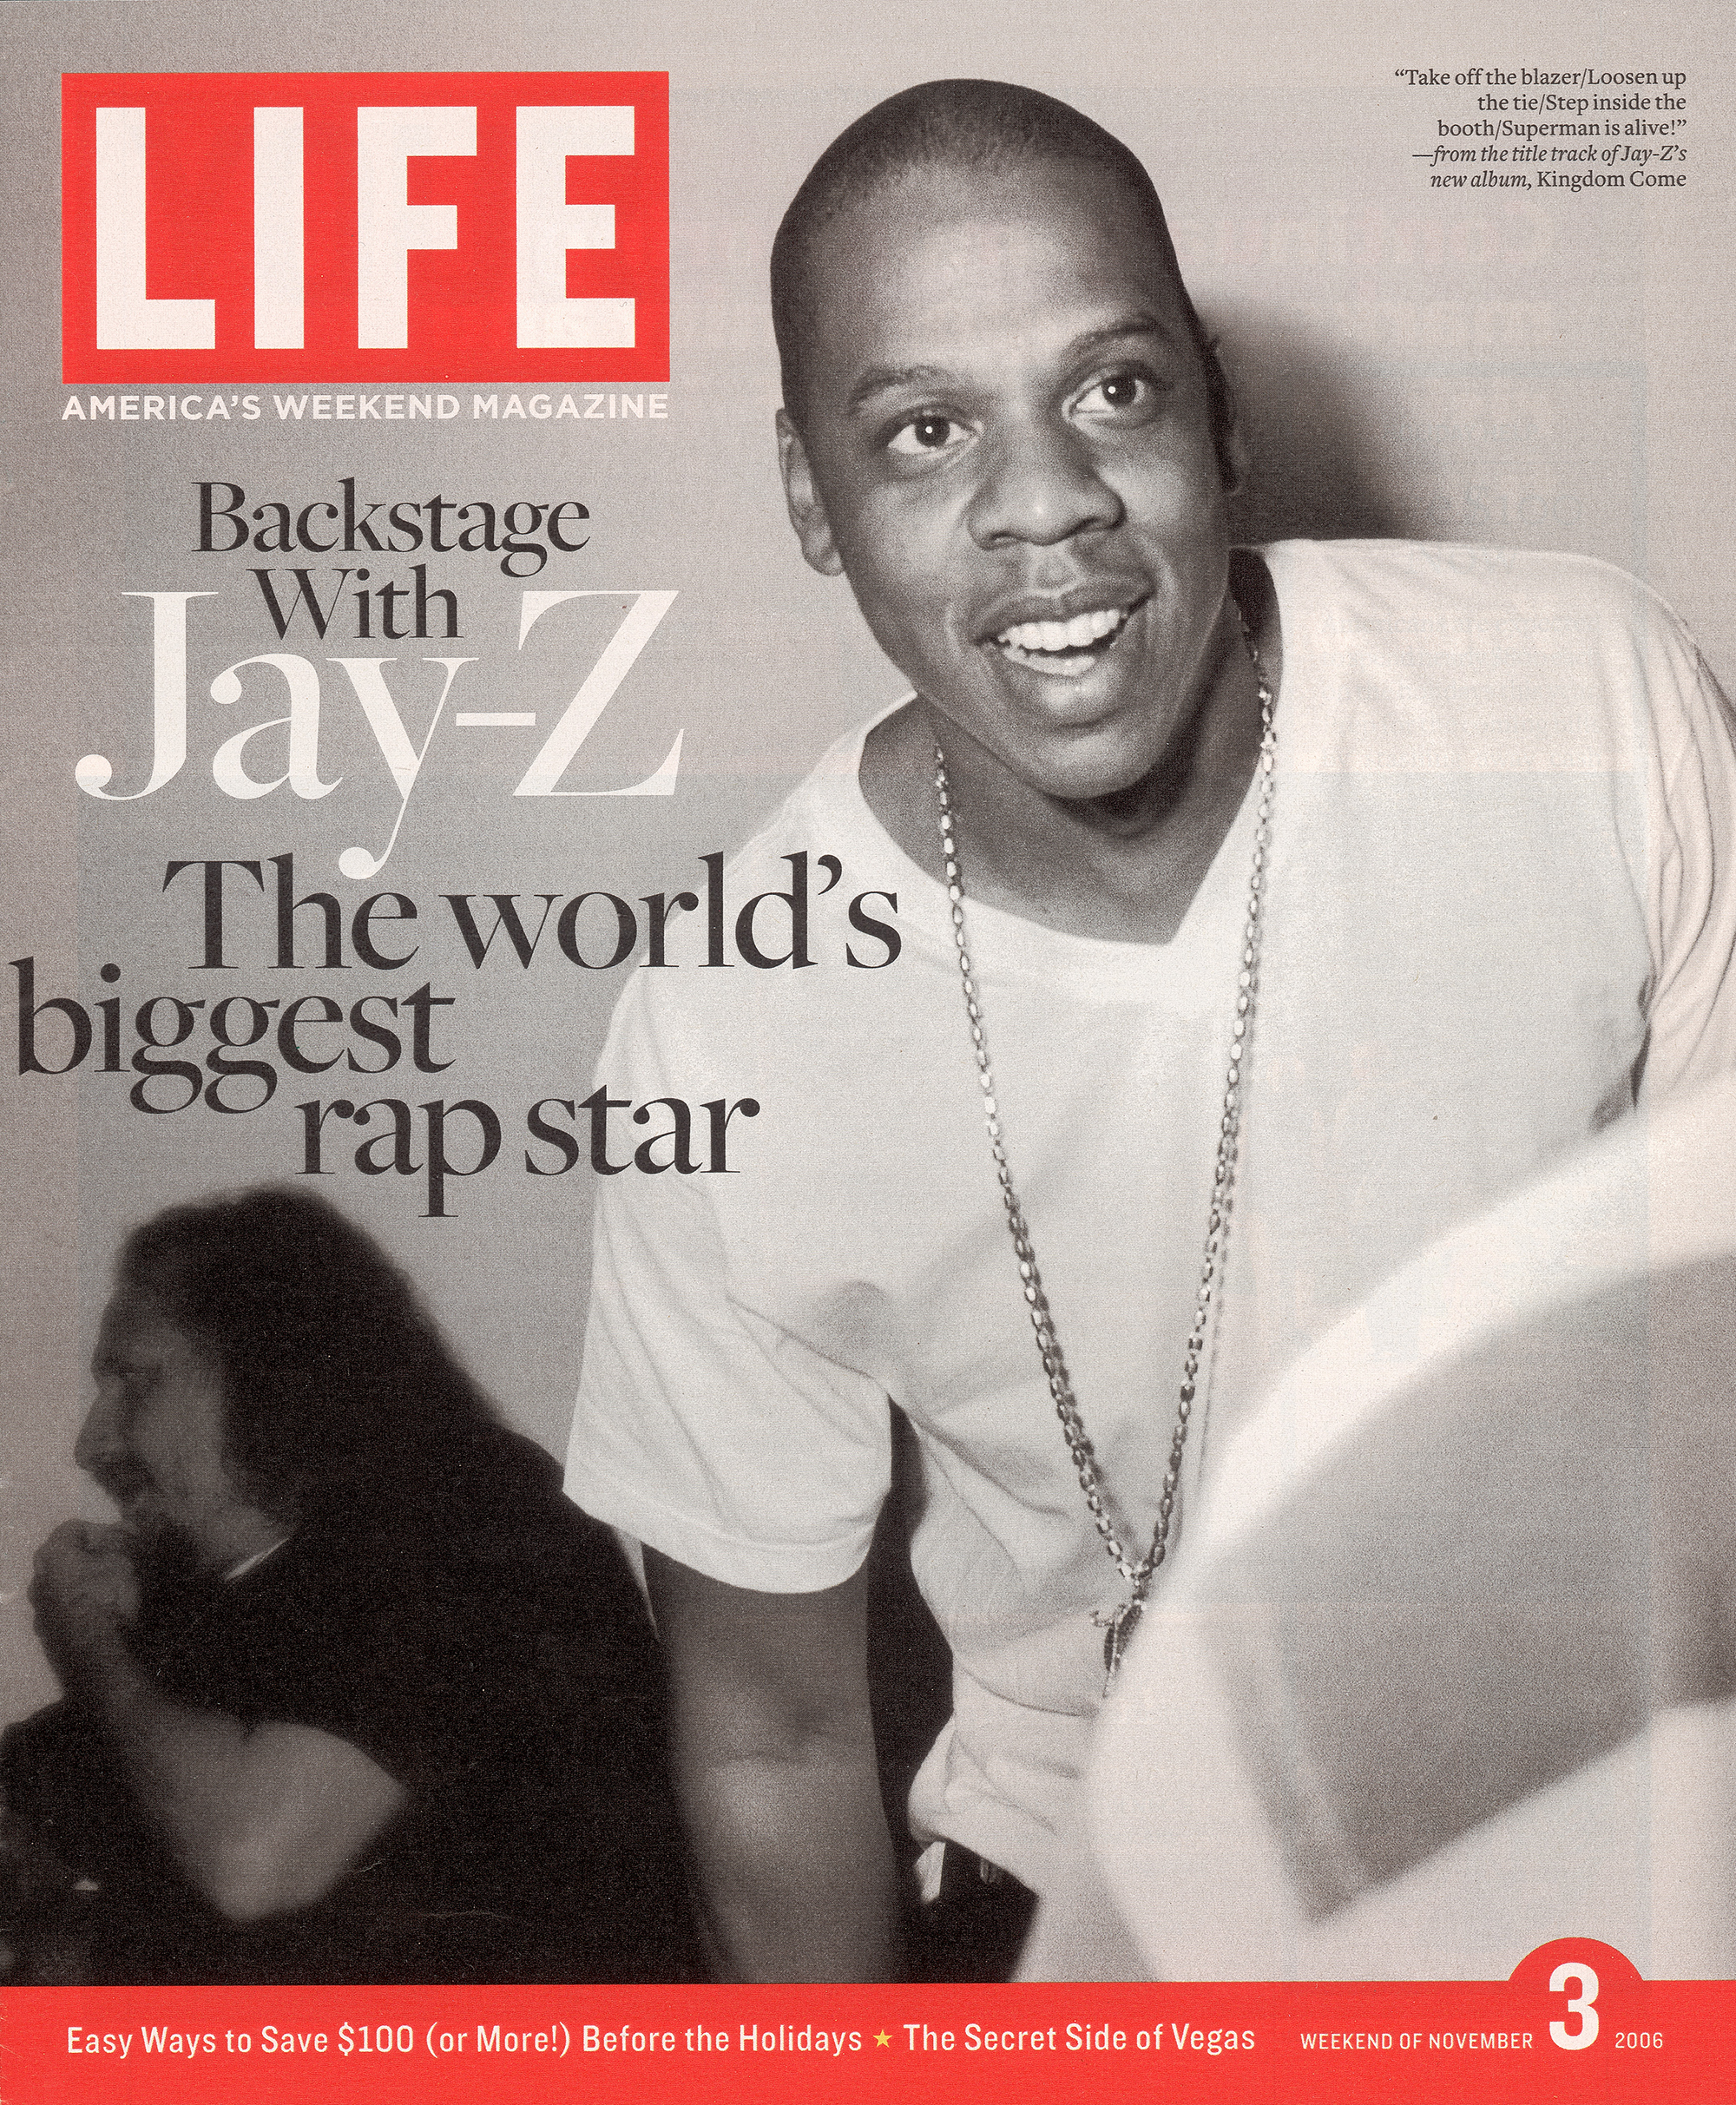 LIFE Cover 11-03-2006 of rapper Jay-Z.